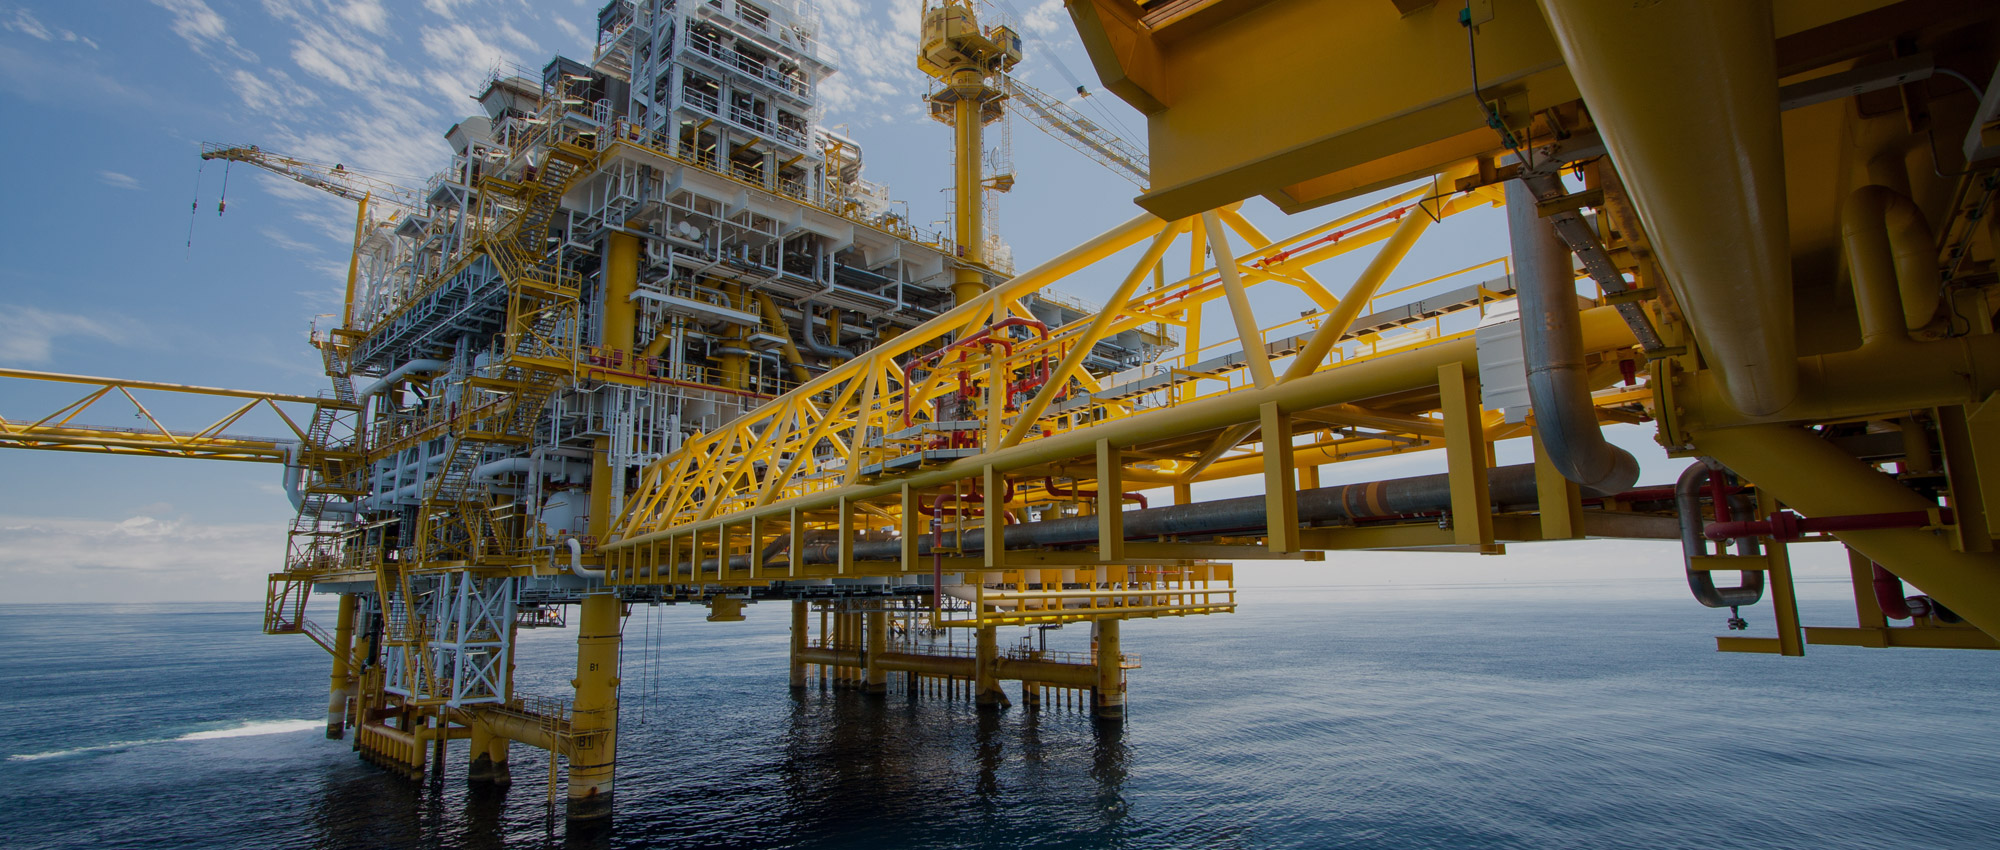 Afras provides a wide Spectrum of Global Trading Activities in the Oil, Gas and Chemical Industry